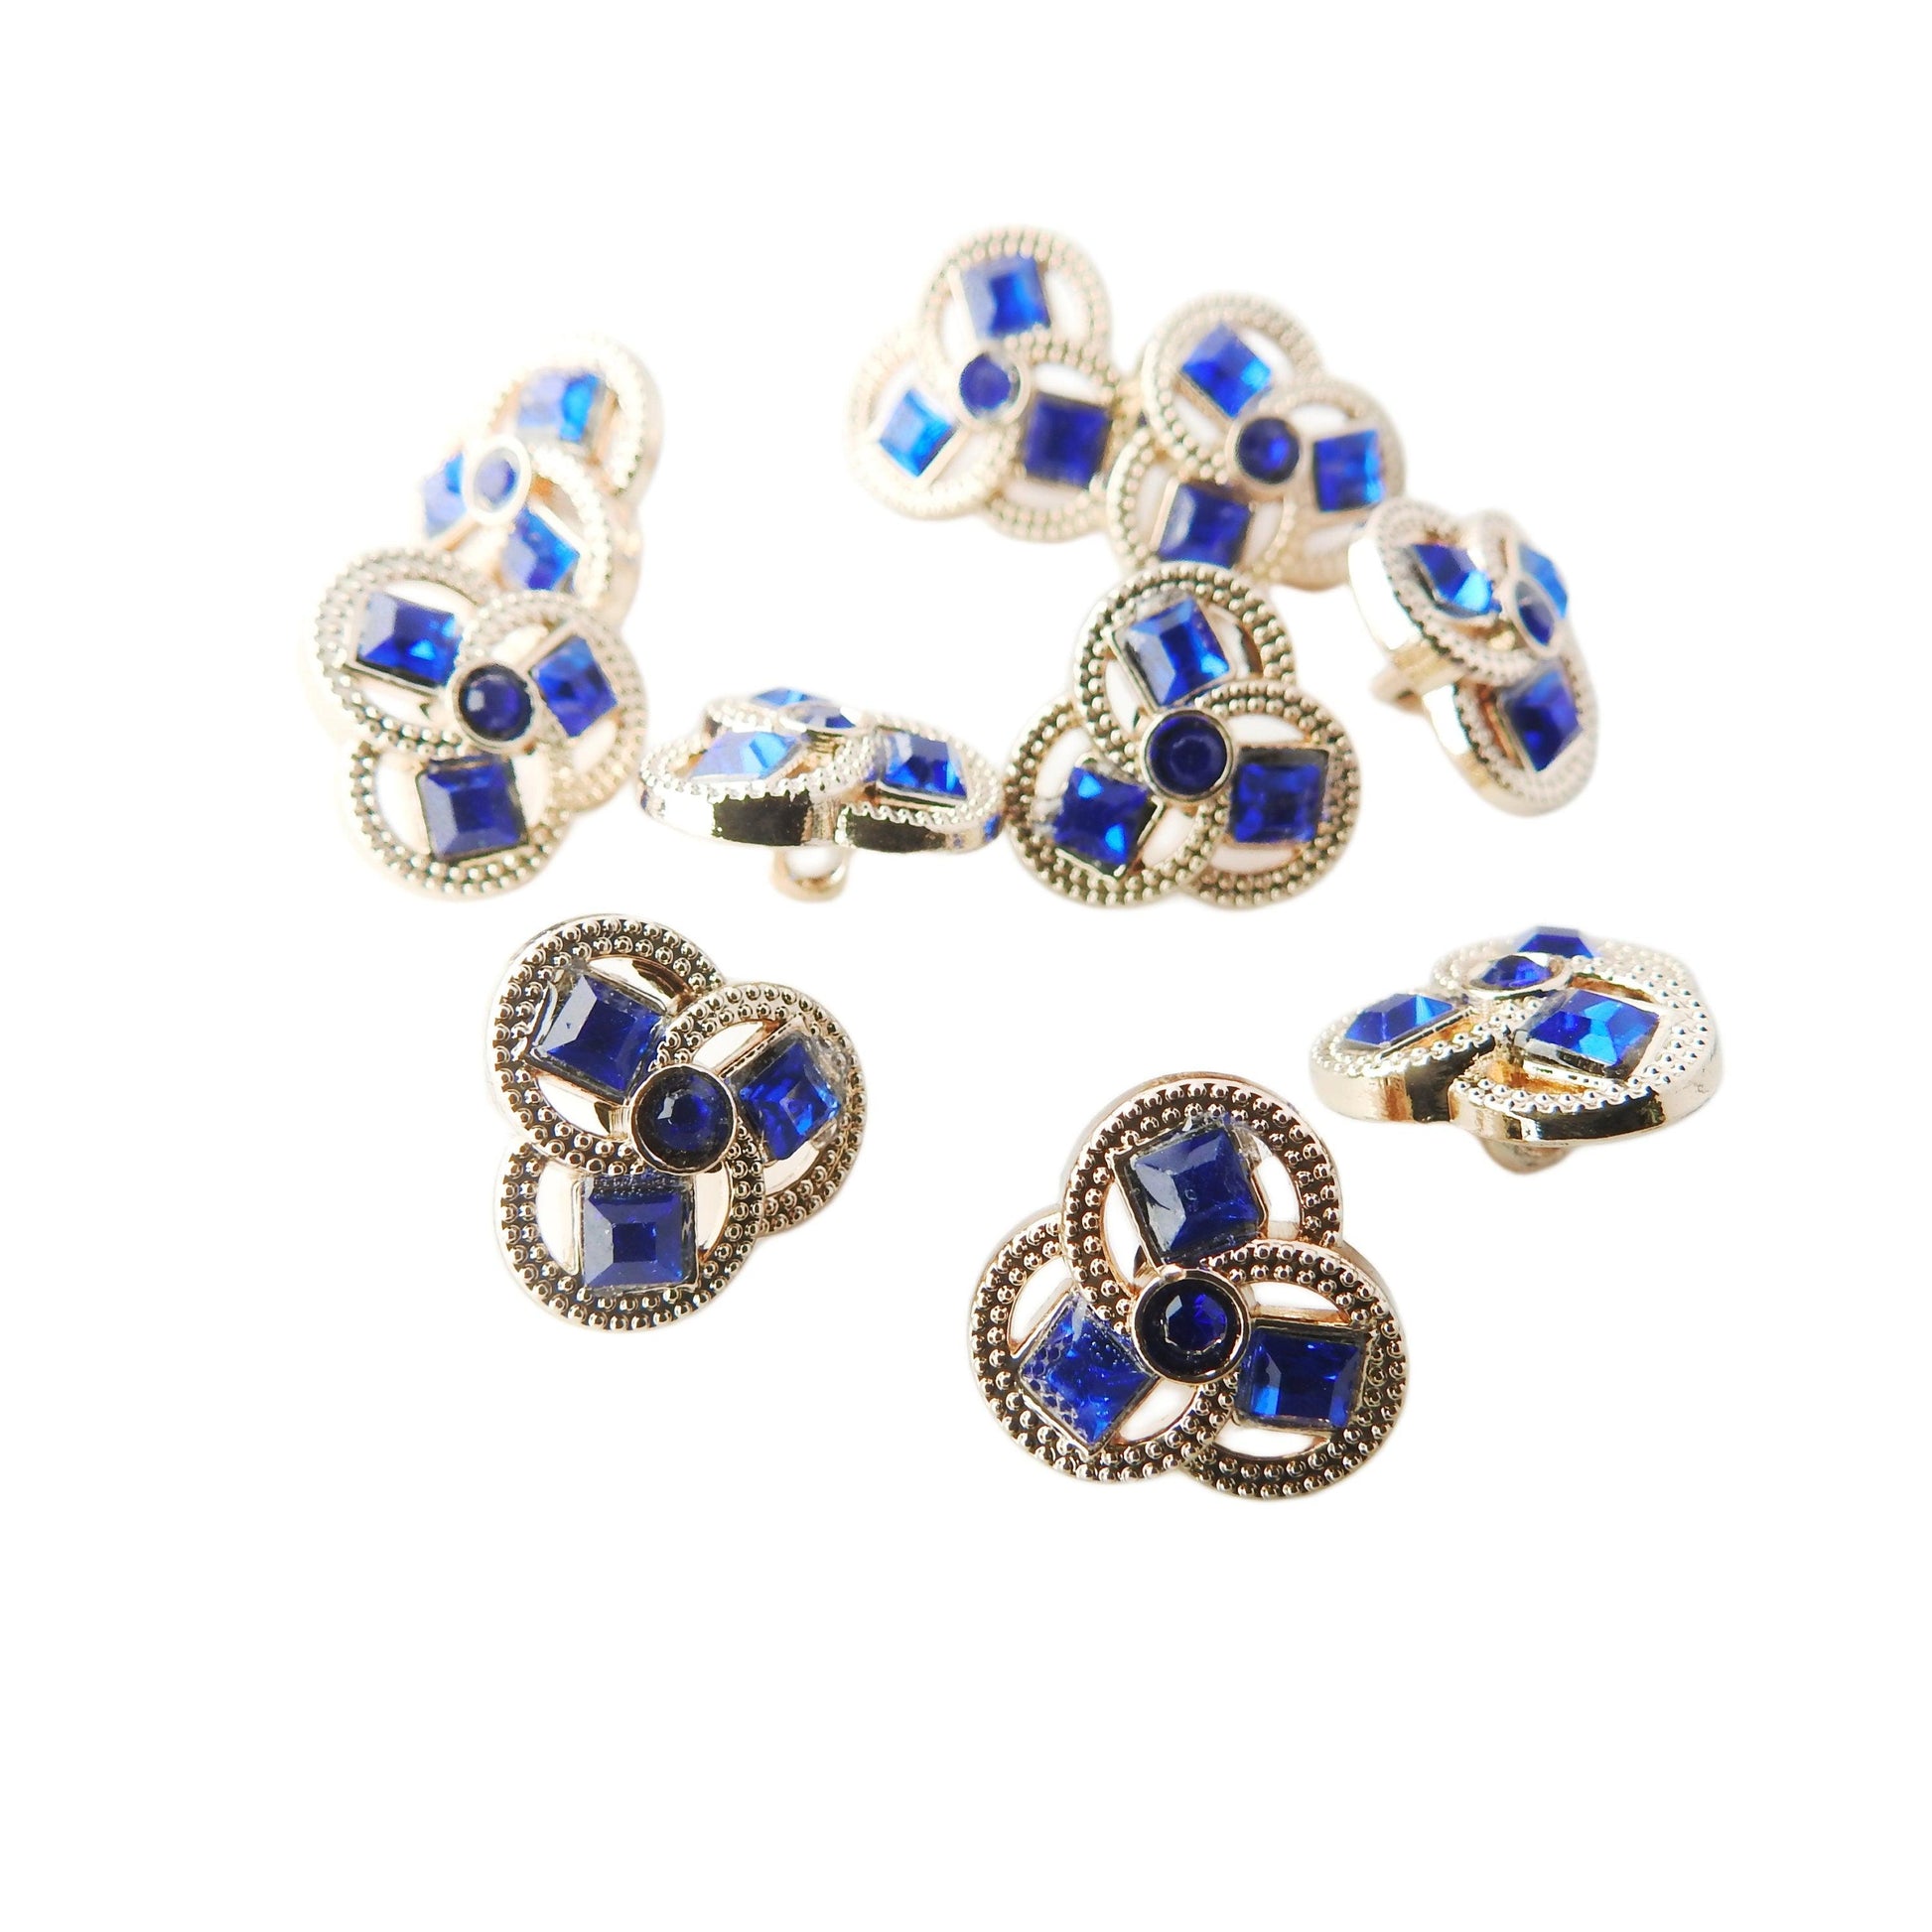 Blue rhinestone buttons with shank. 13 mm. For sewing on a headband, a dress, a blouse, shirt or bling accessories. 10 small crystal buttons